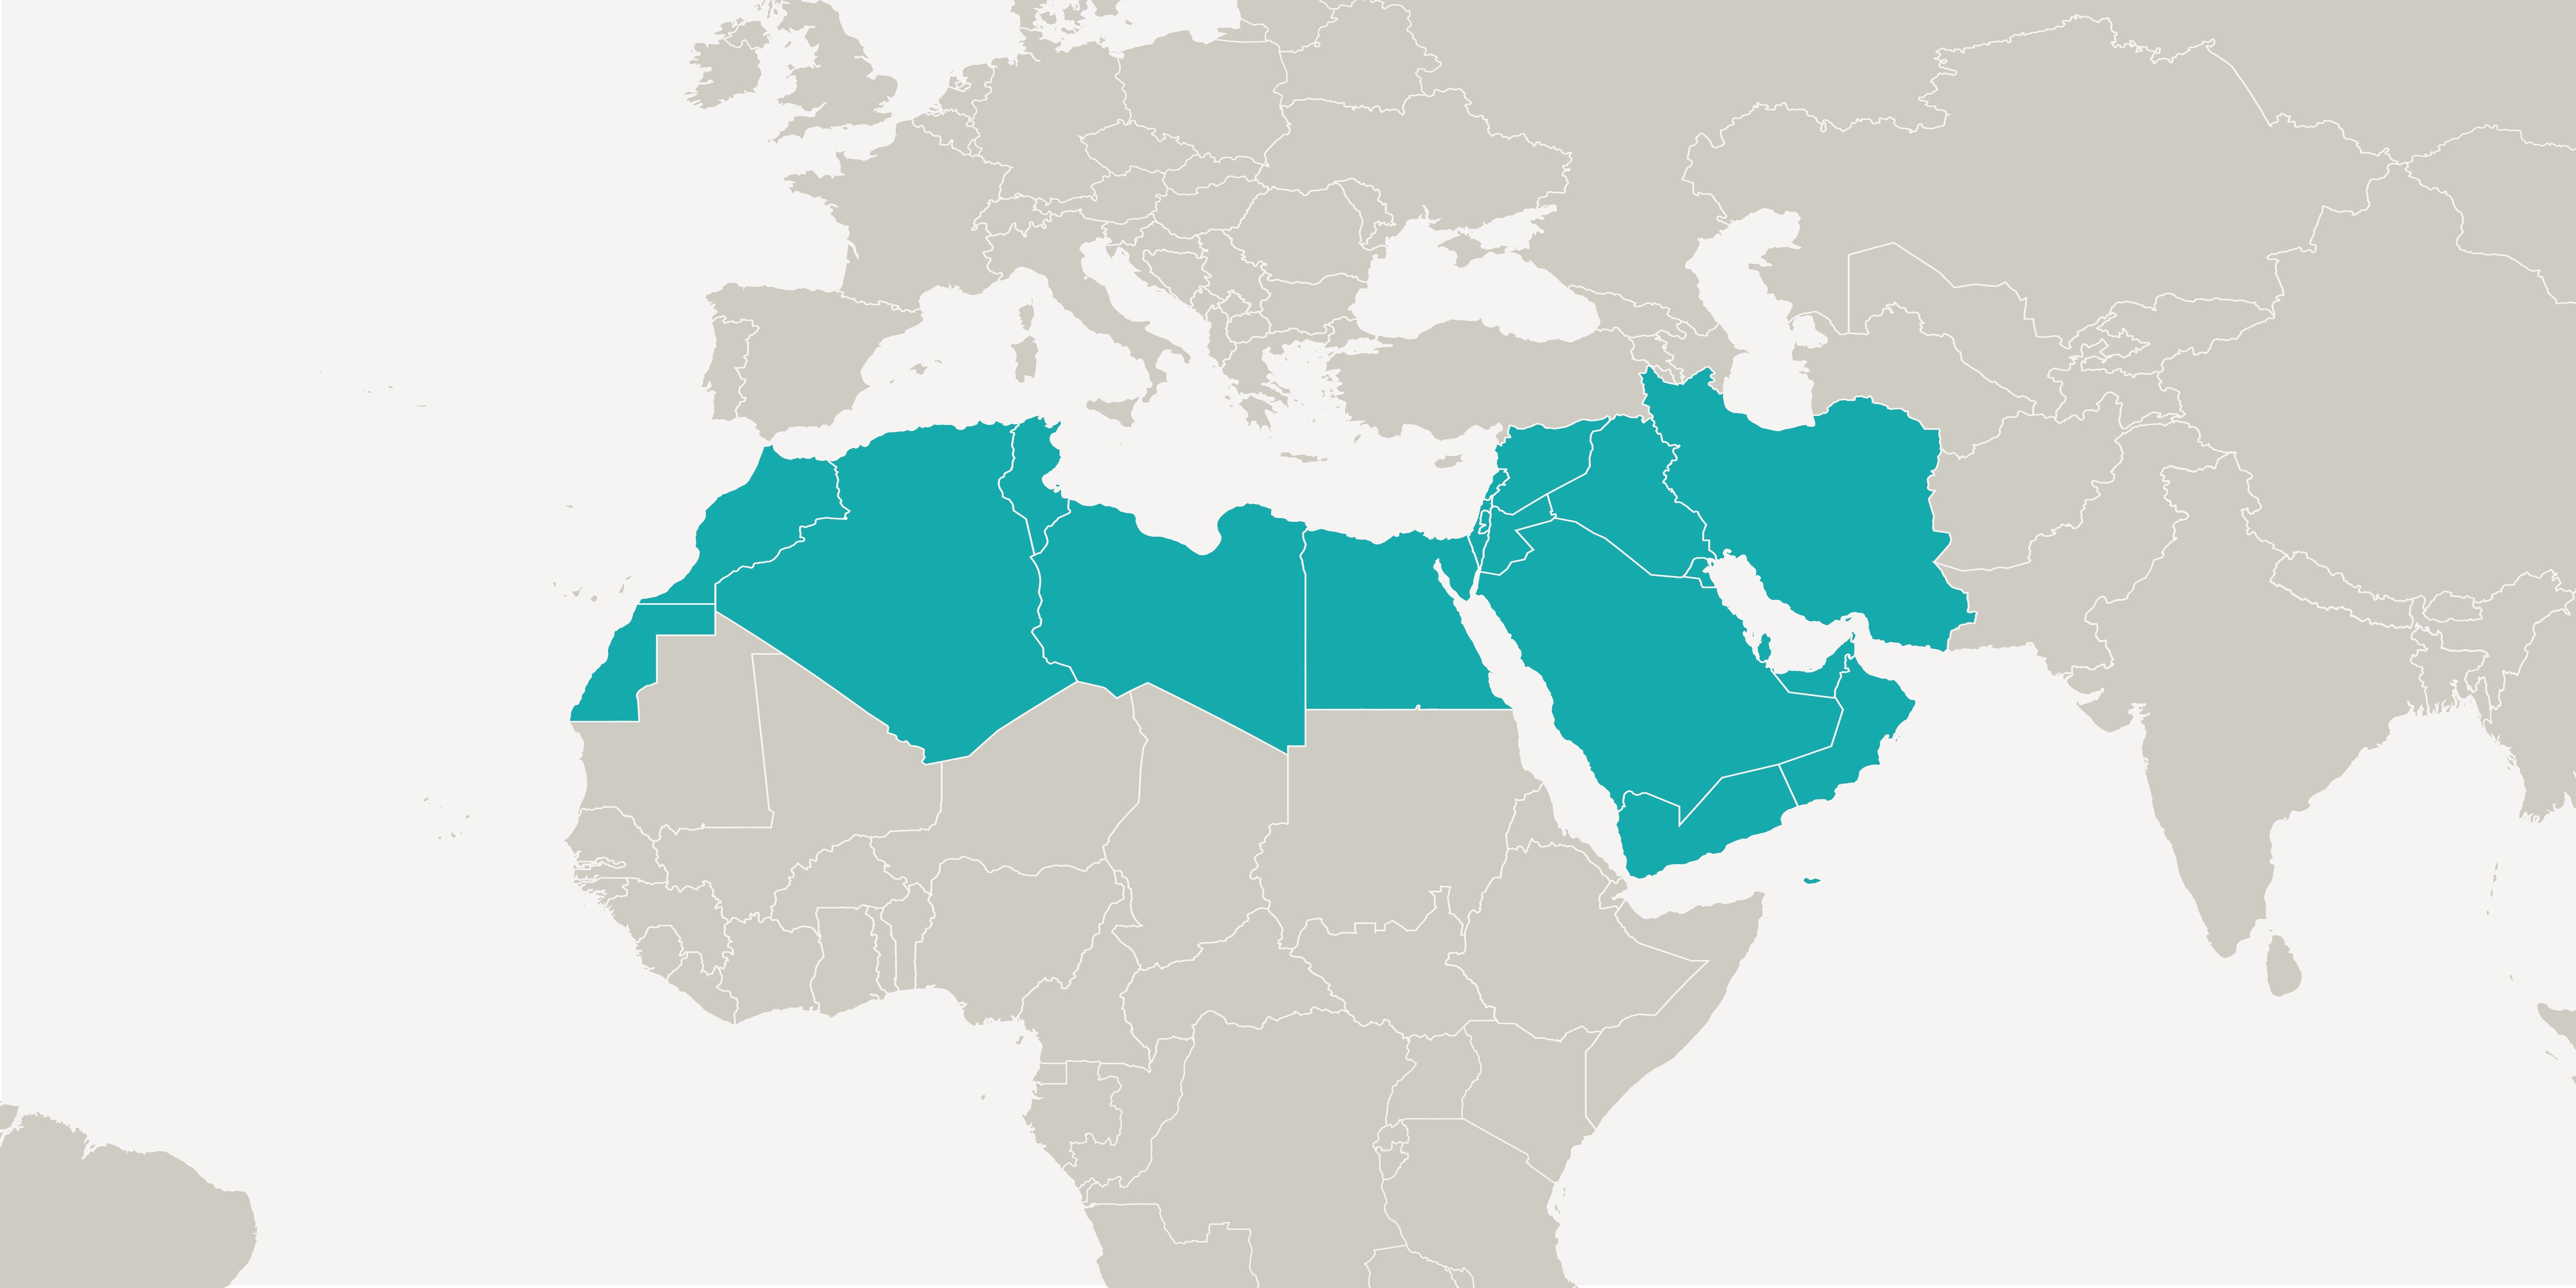 A graphic shows a section of a world map. The 18 countries of the MENA (Middle East and North Africa) region are highlighted in colour.